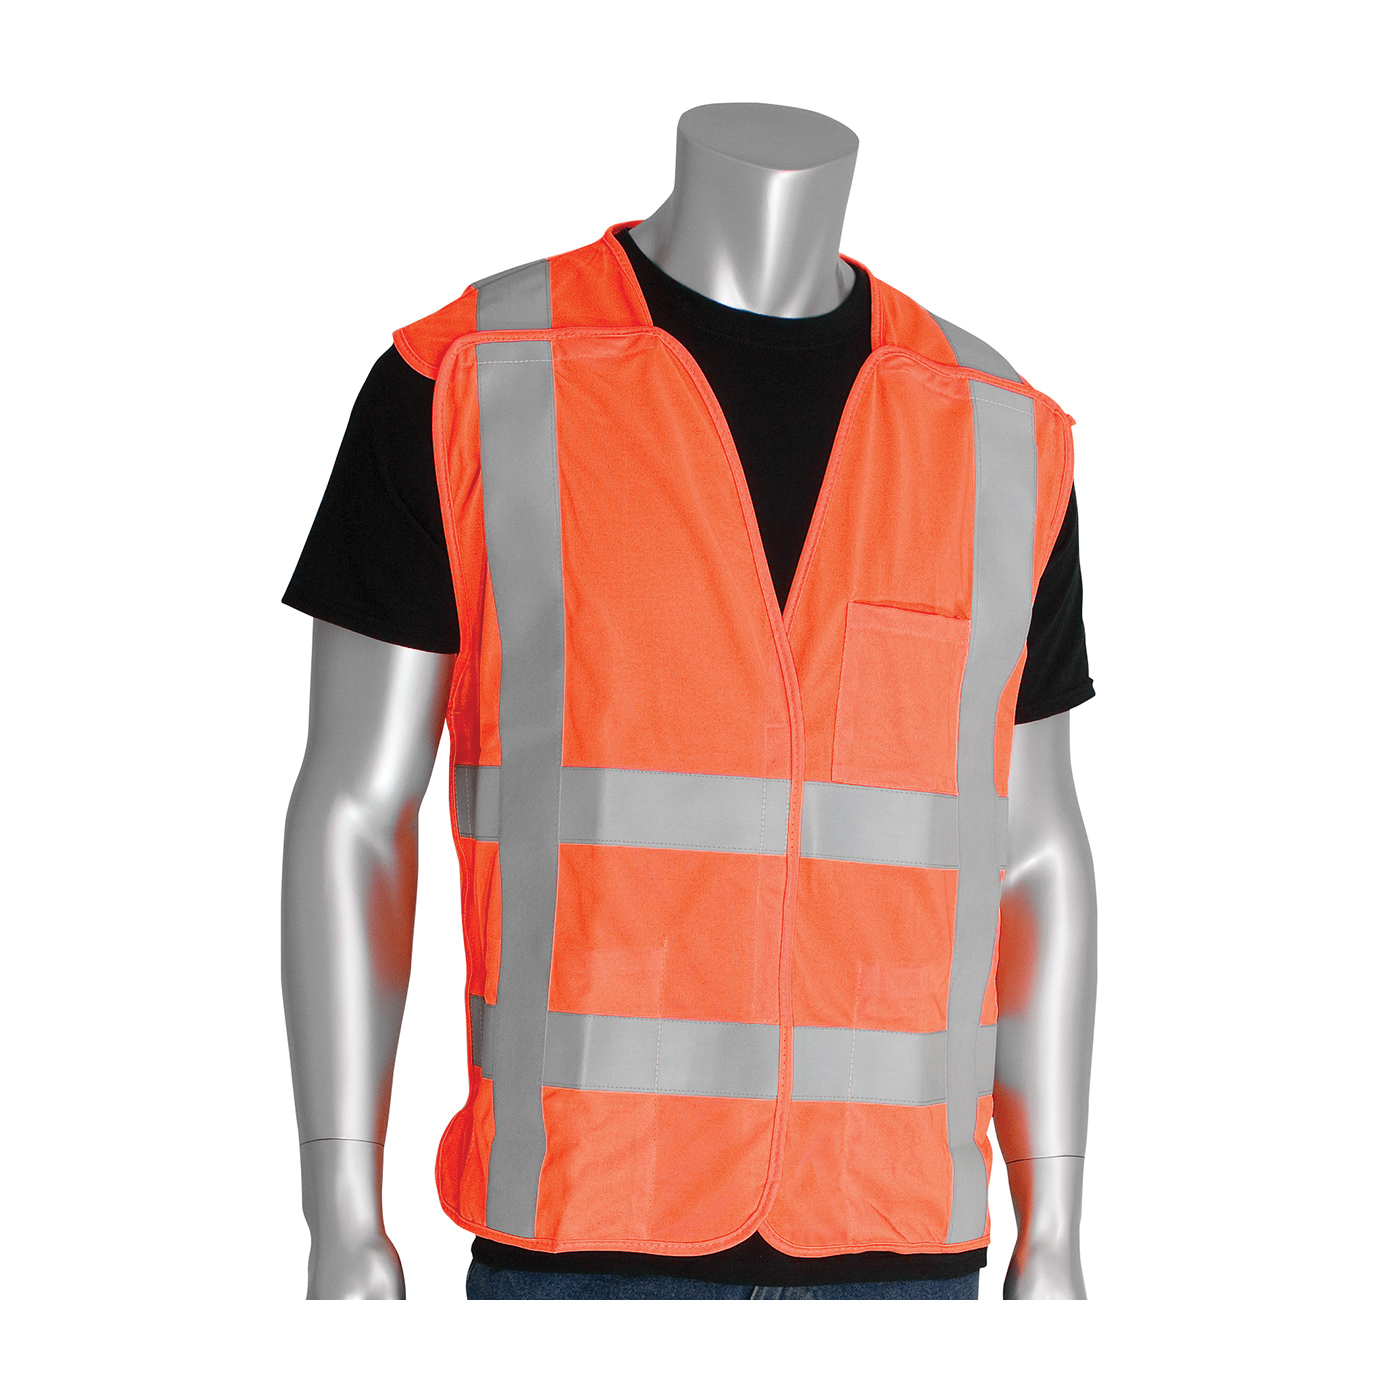 PIP® SafetyGear 305-5PVFROR-4X/5X FR Treated Solid Vest, 4XL/5XL, Hi-Viz Orange, Polyester, Hook and Loop Closure, ANSI Class: Class 2, Specifications Met: ANSI/ISEA 107